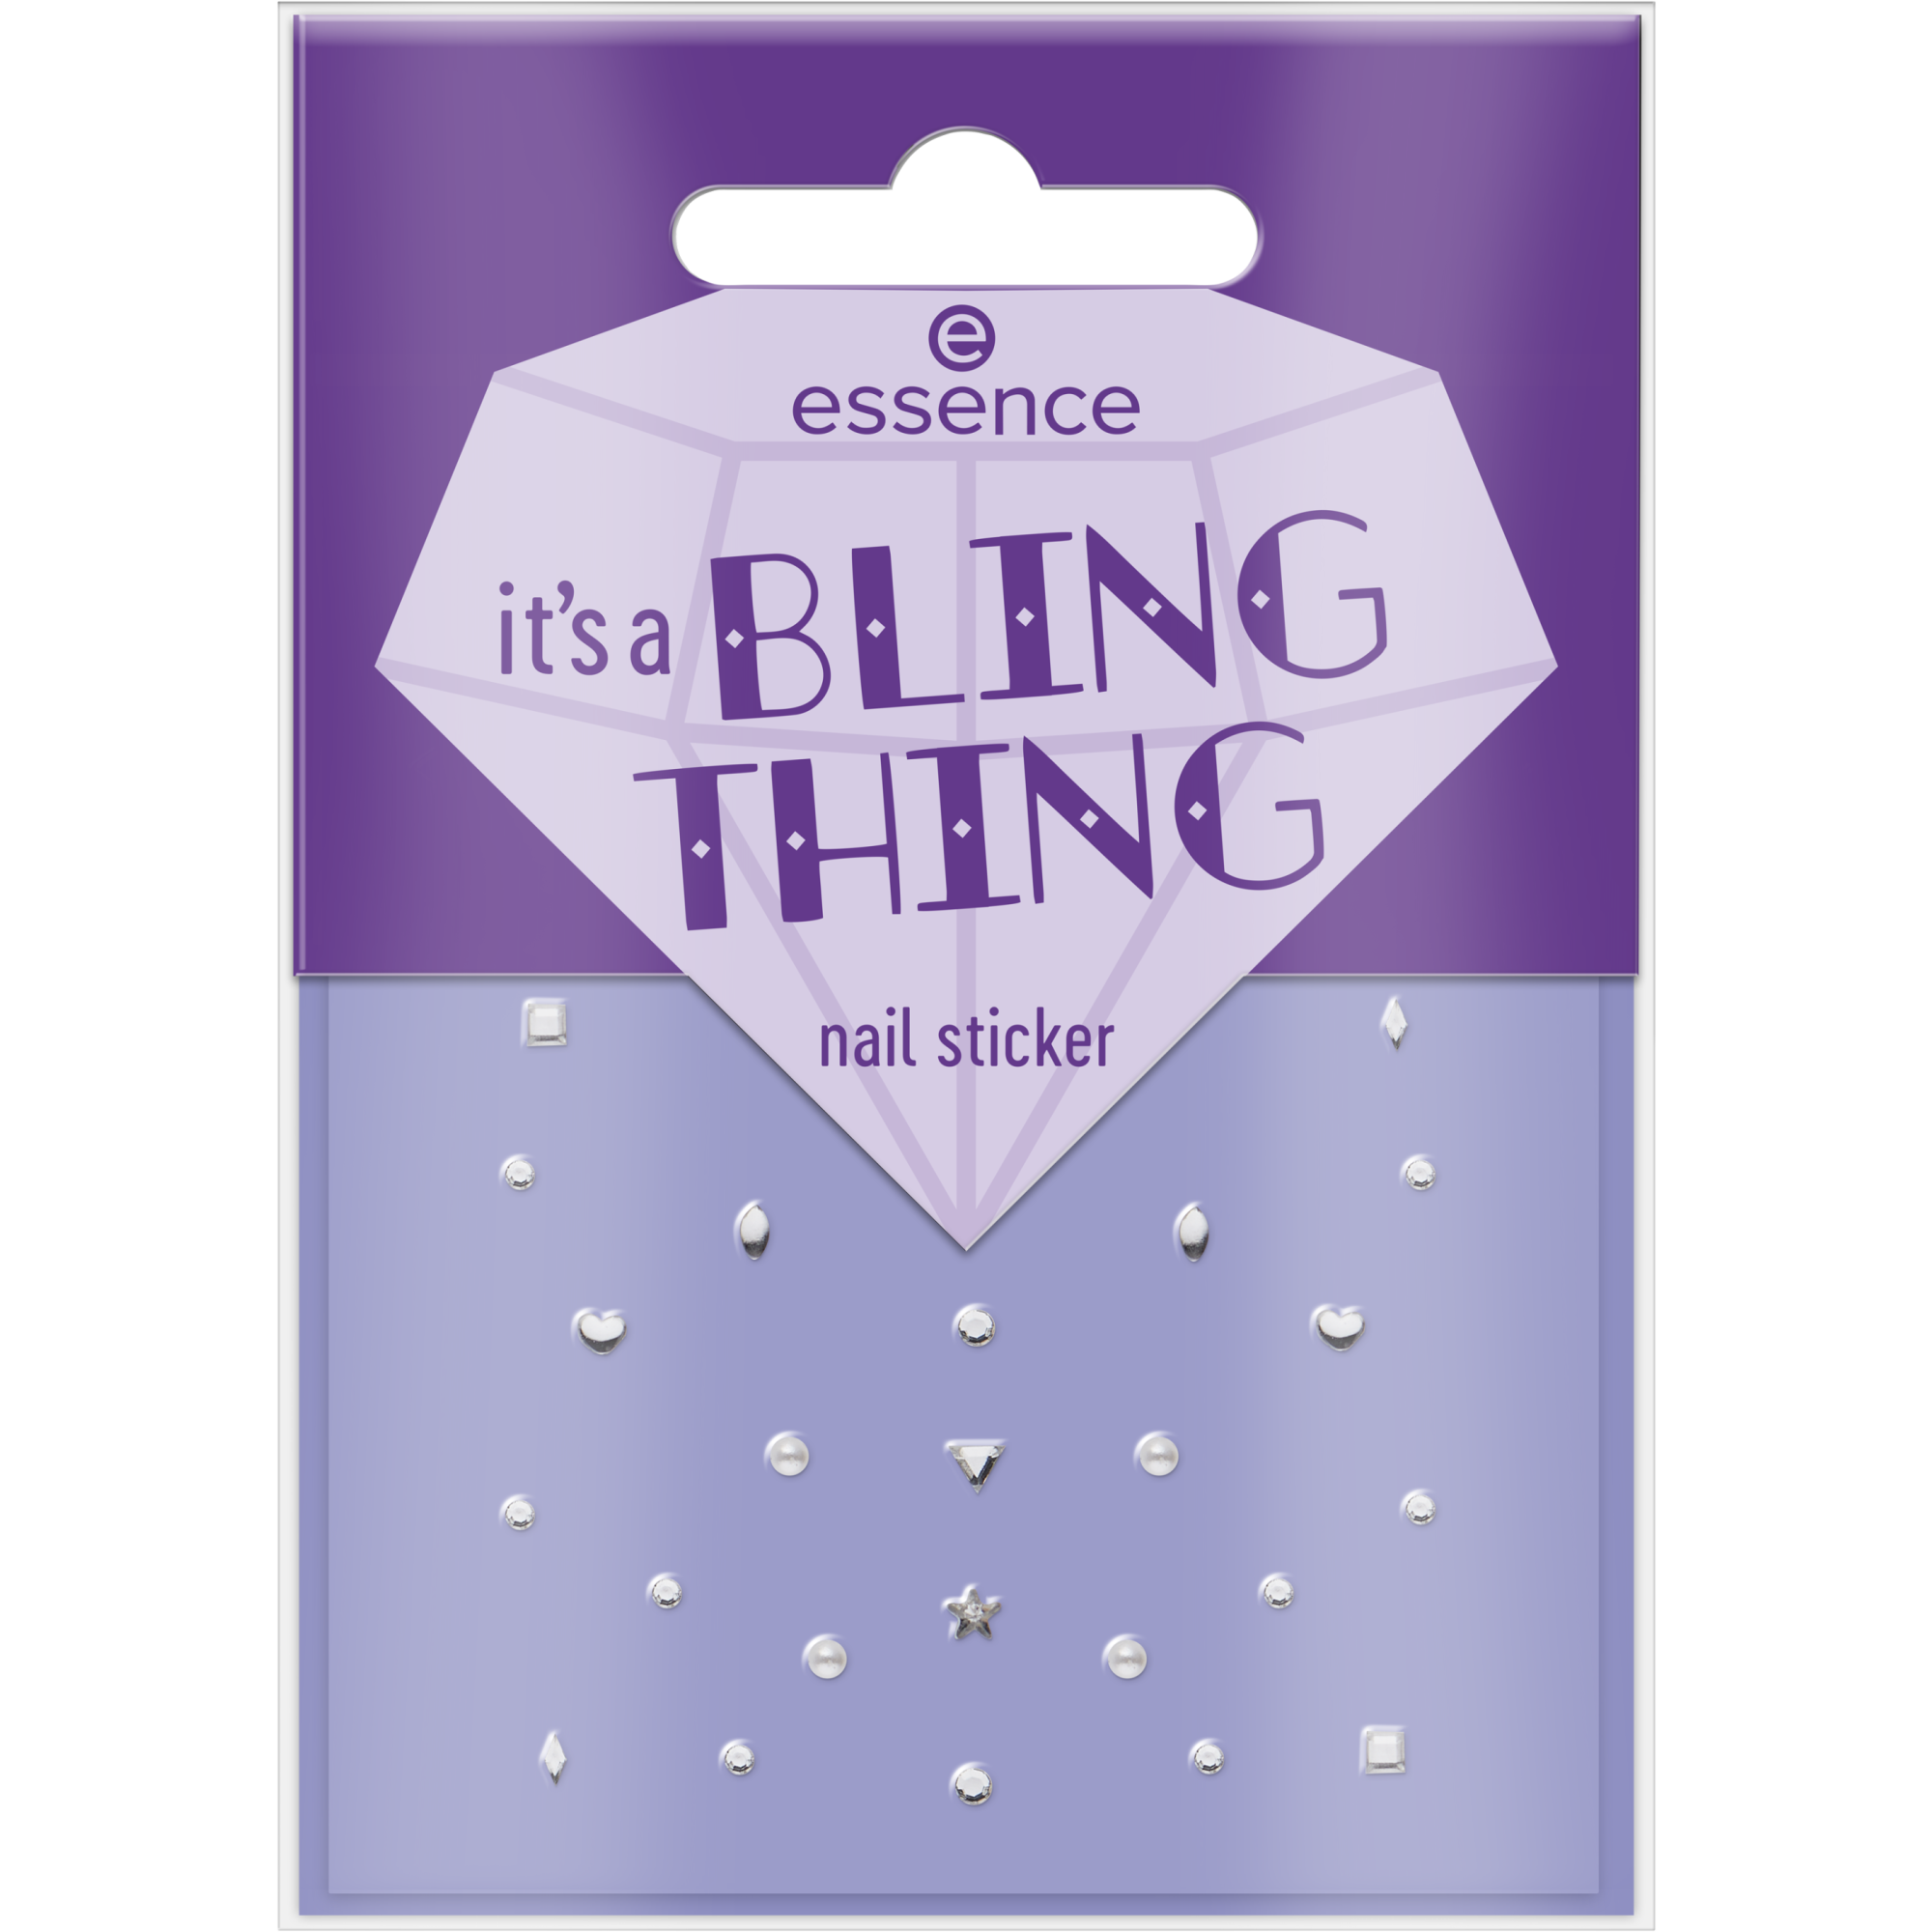 It's a BLING THING nail sticker